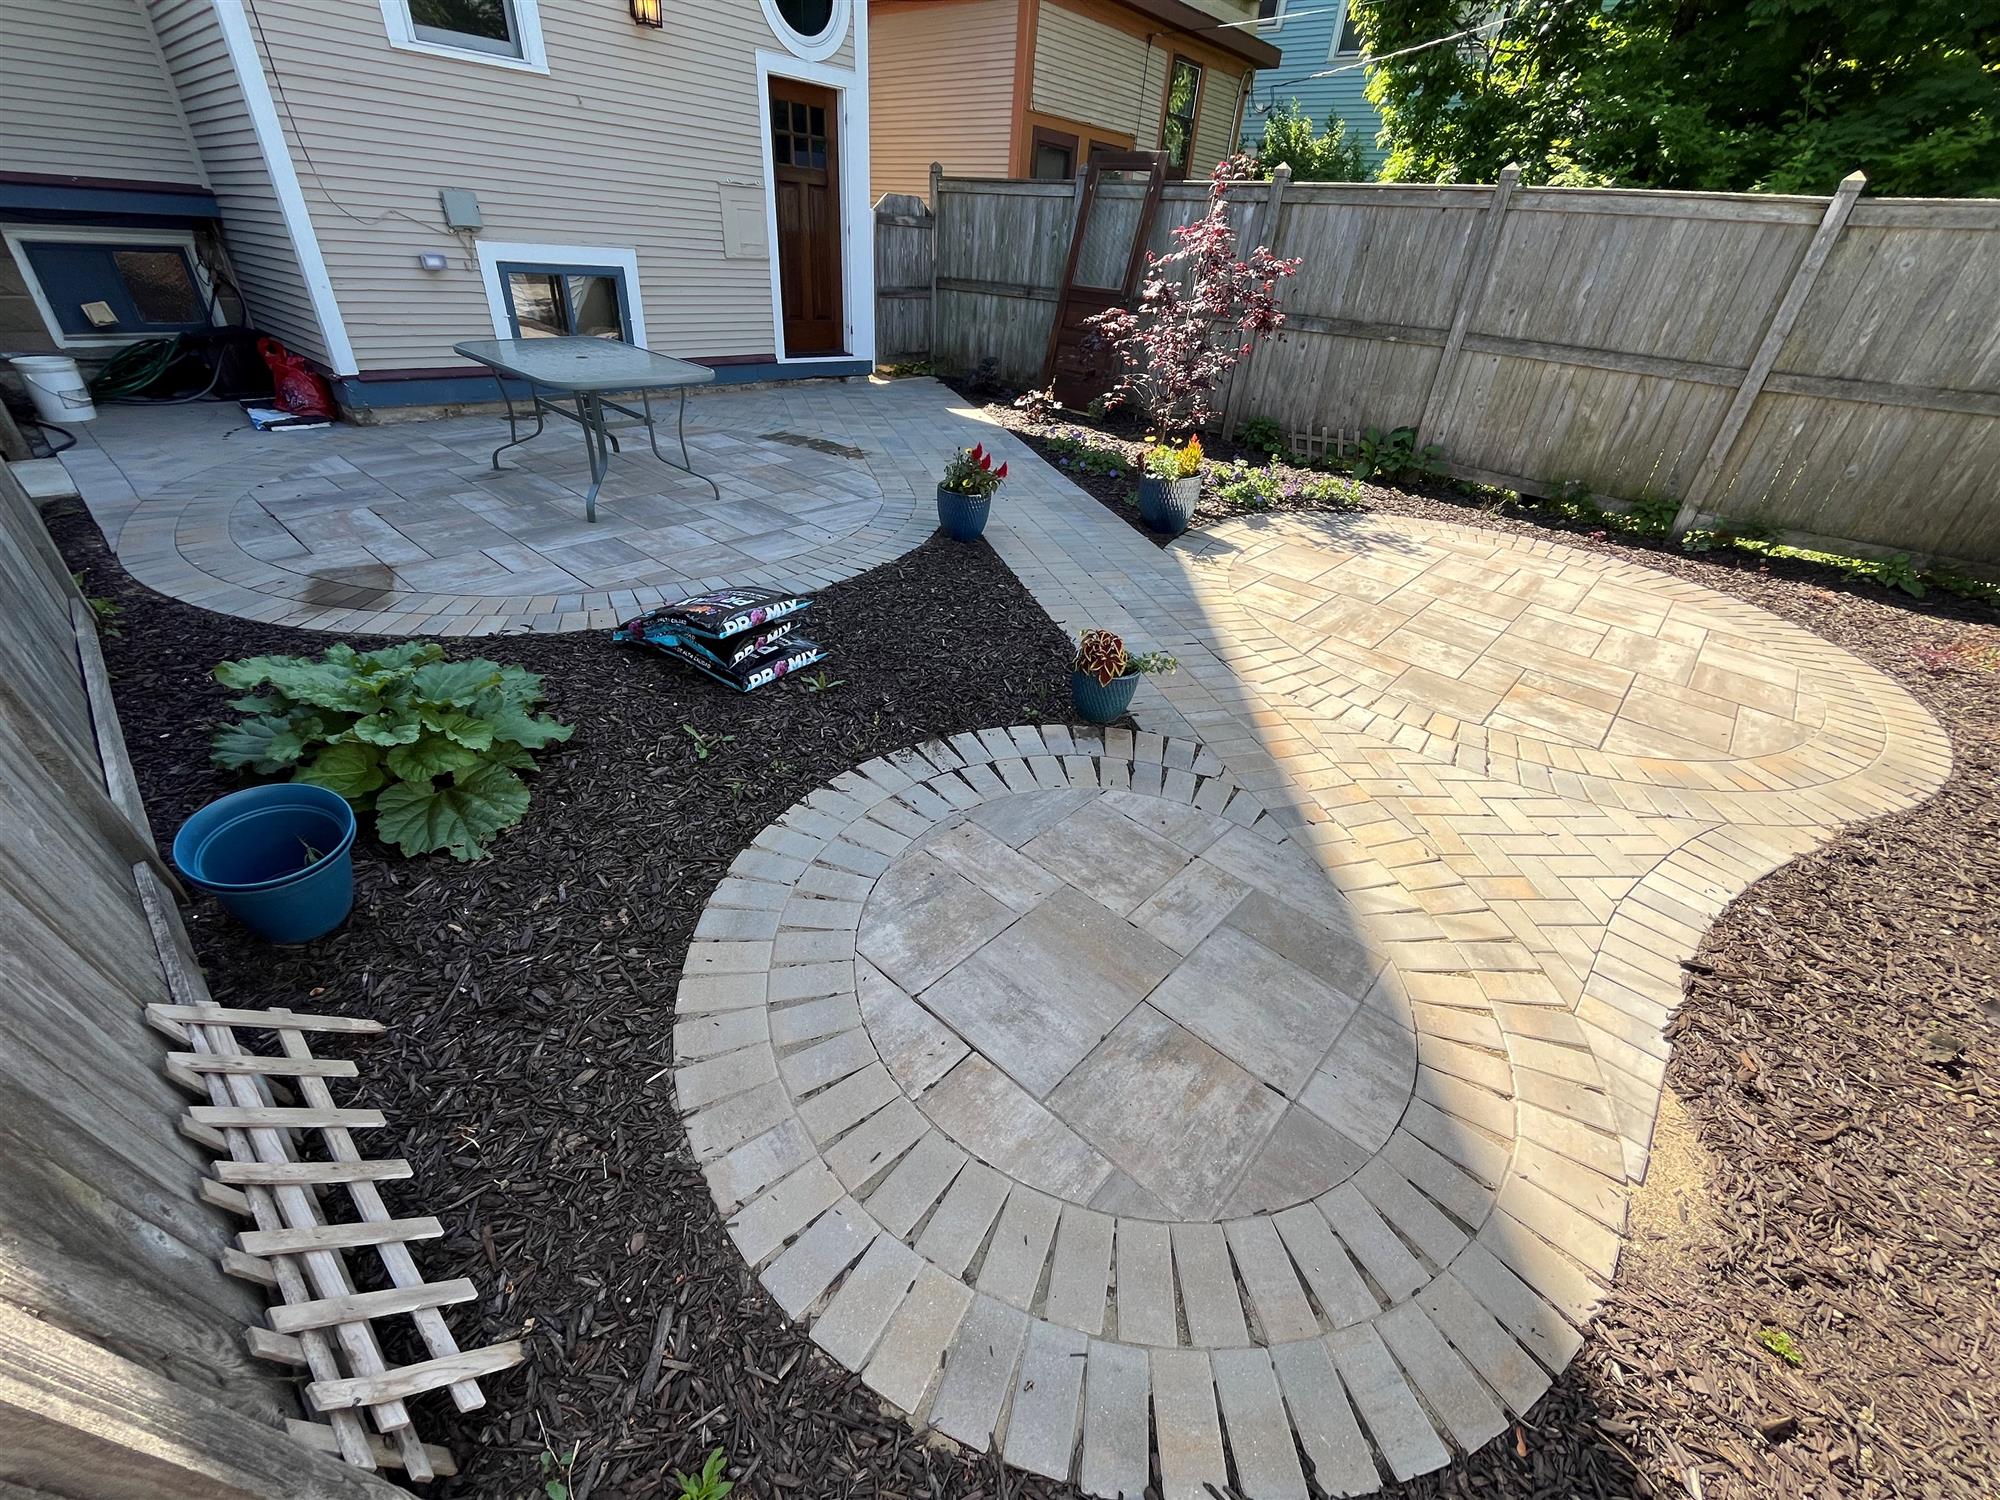 Patio with Circular Designs Connected by Path